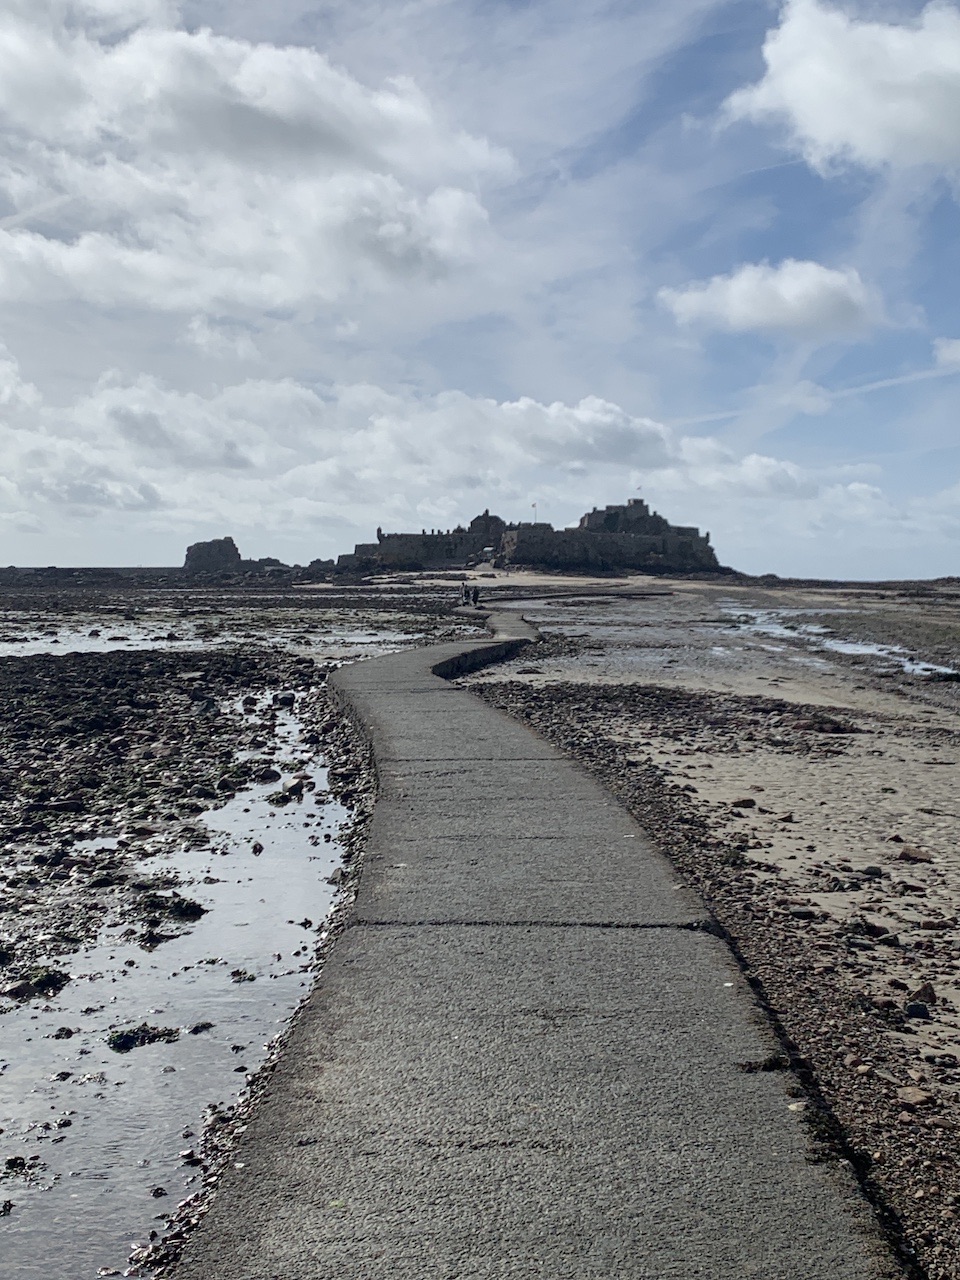 Seabed Walk to Elizabeth Castle: The Coolest Thing About St. Helier